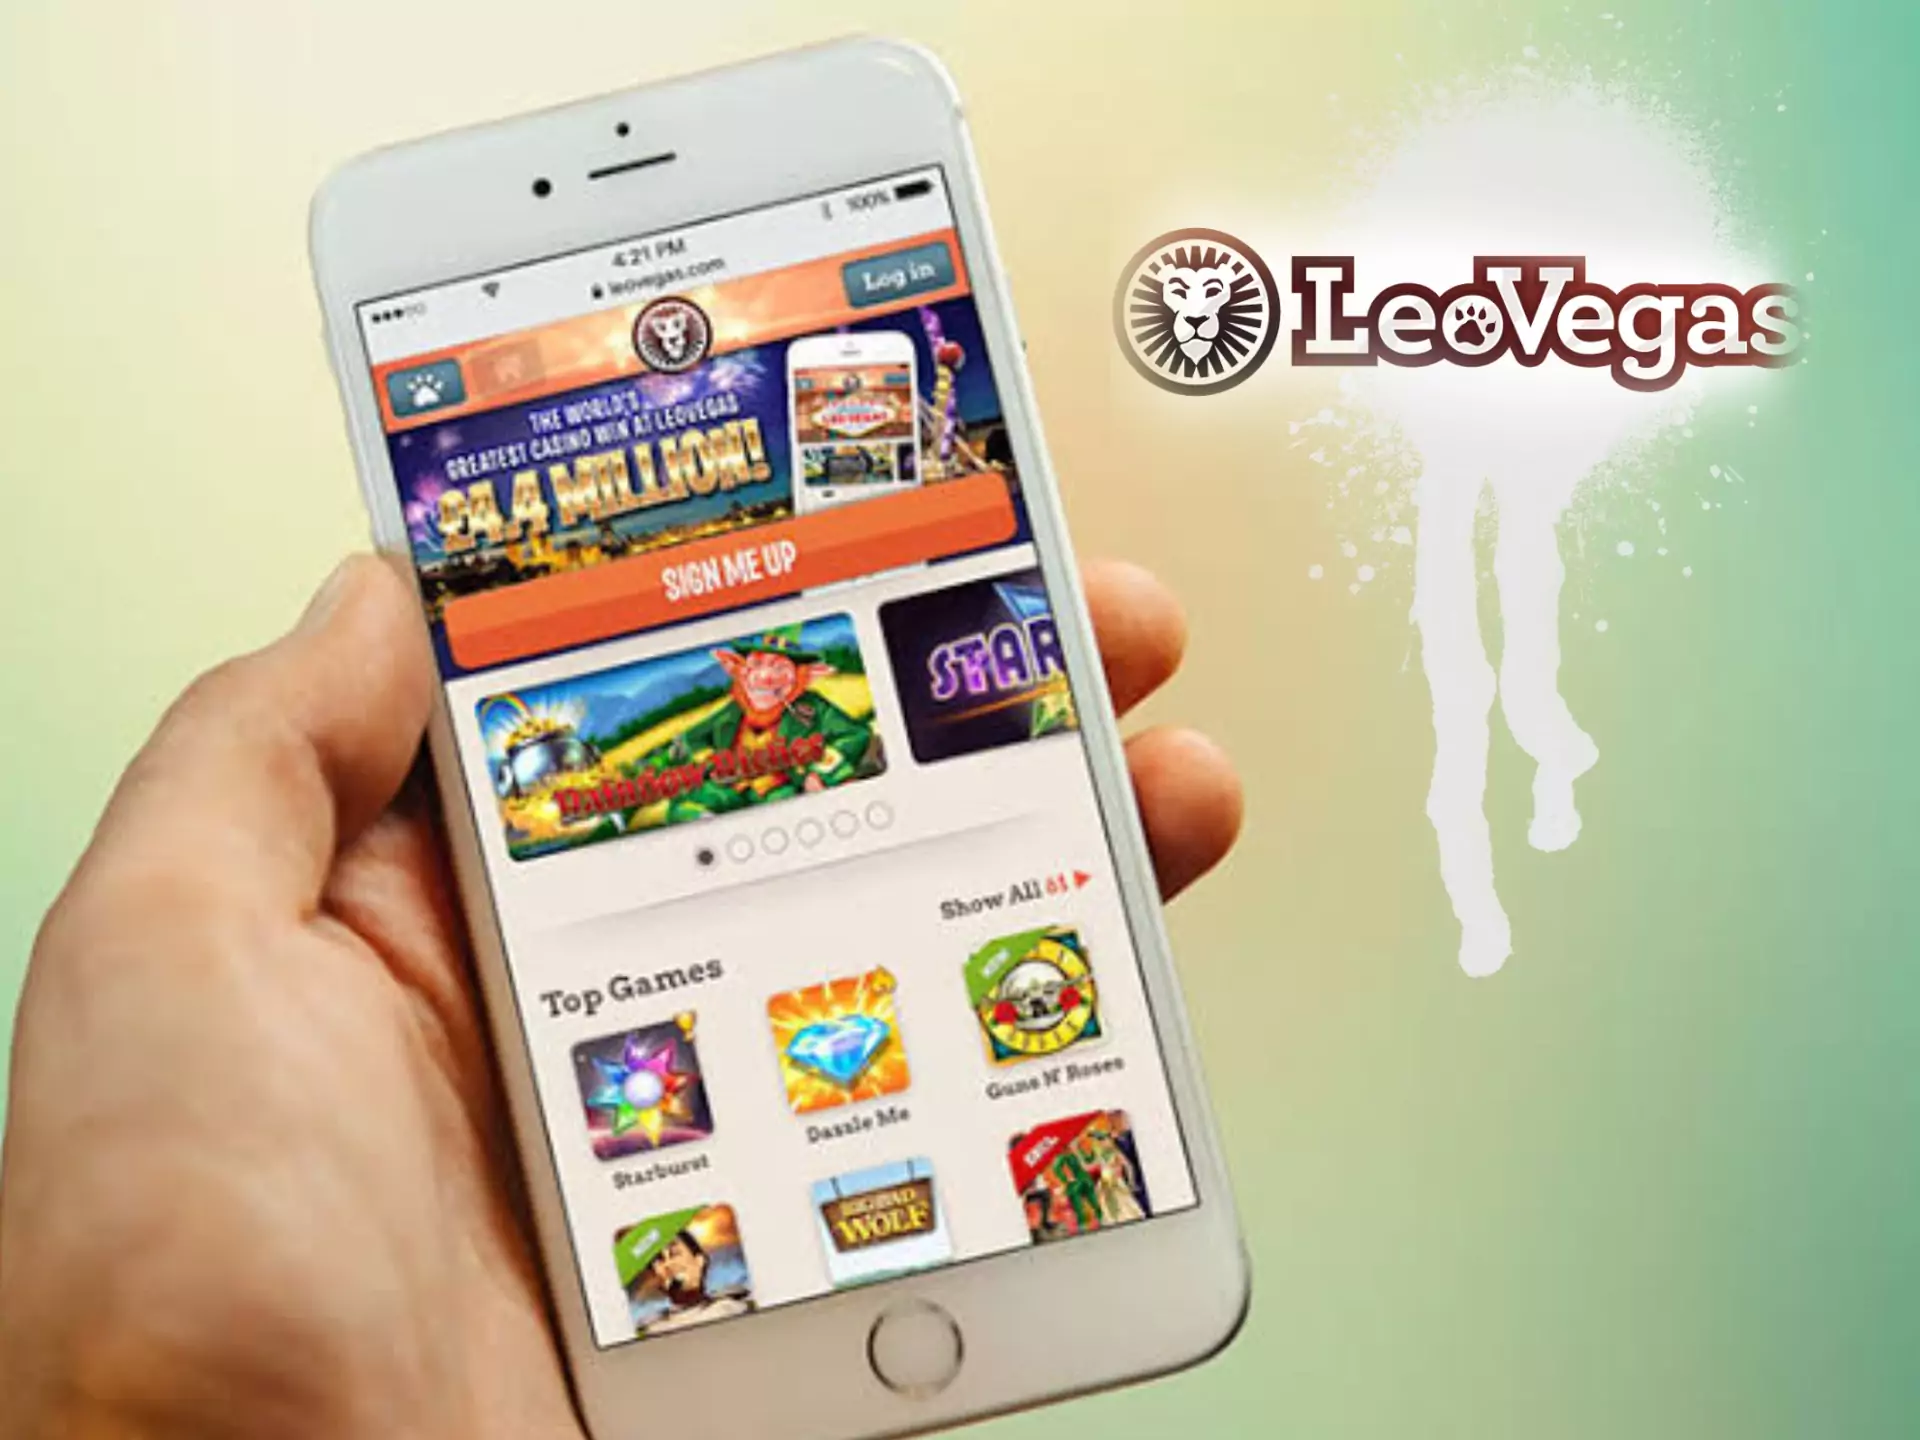 Betting is much more convenient with the LeoVegas mobile app.